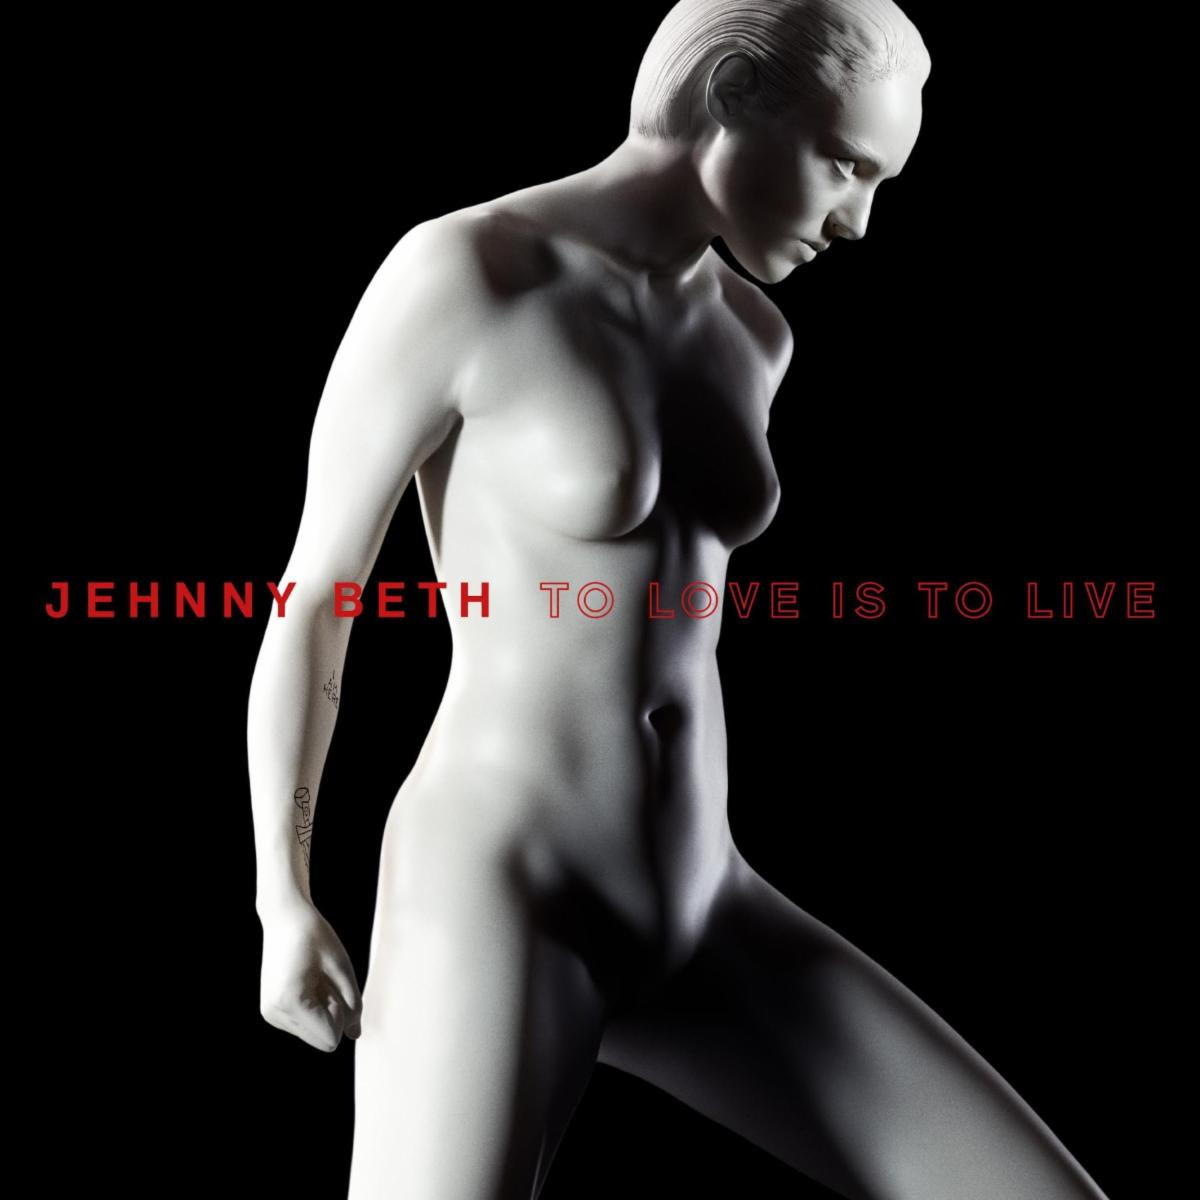 To Love is to Live by Jehnny Beth album review by Gregory Adams for Northern Transmissions